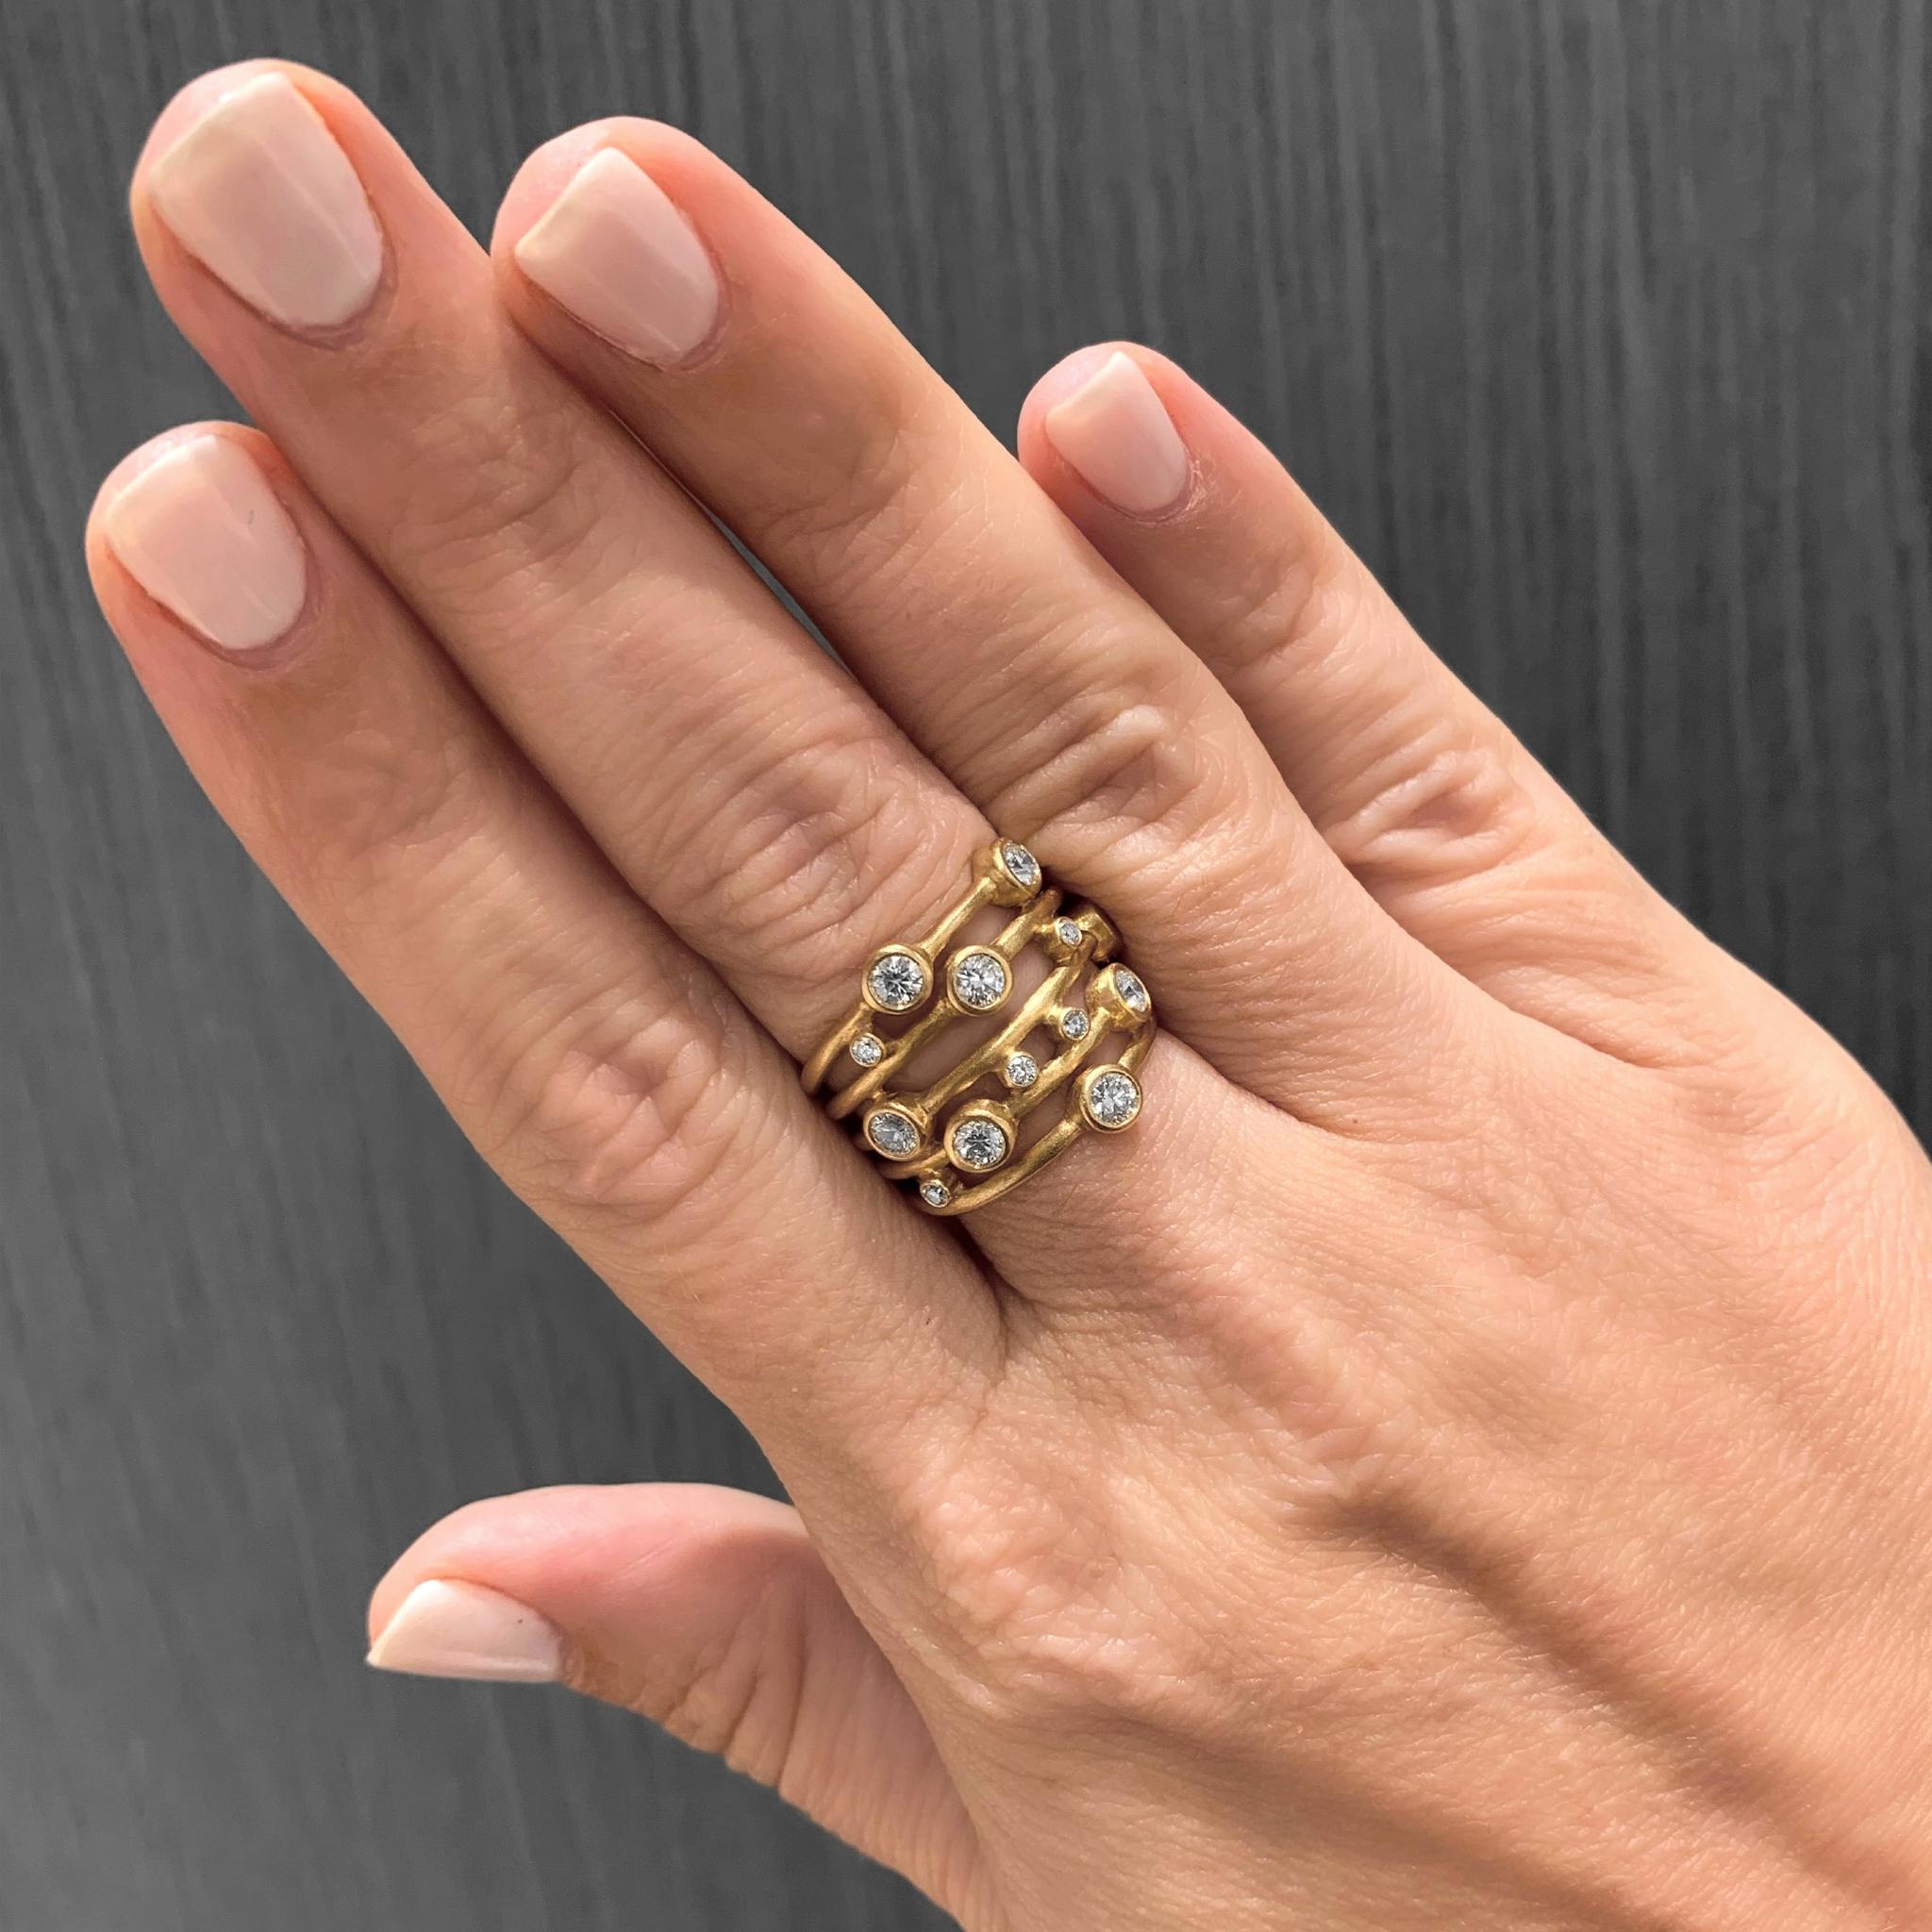 Bubble Wrap Ring hand-fabricated in Denmark by Wille Jewellery in satin-finished 18k yellow gold showcasing thirteen round brilliant-cut white diamonds totaling 0.80 carats, individually bezel-set and scattered across five solid gold bands. Stamped